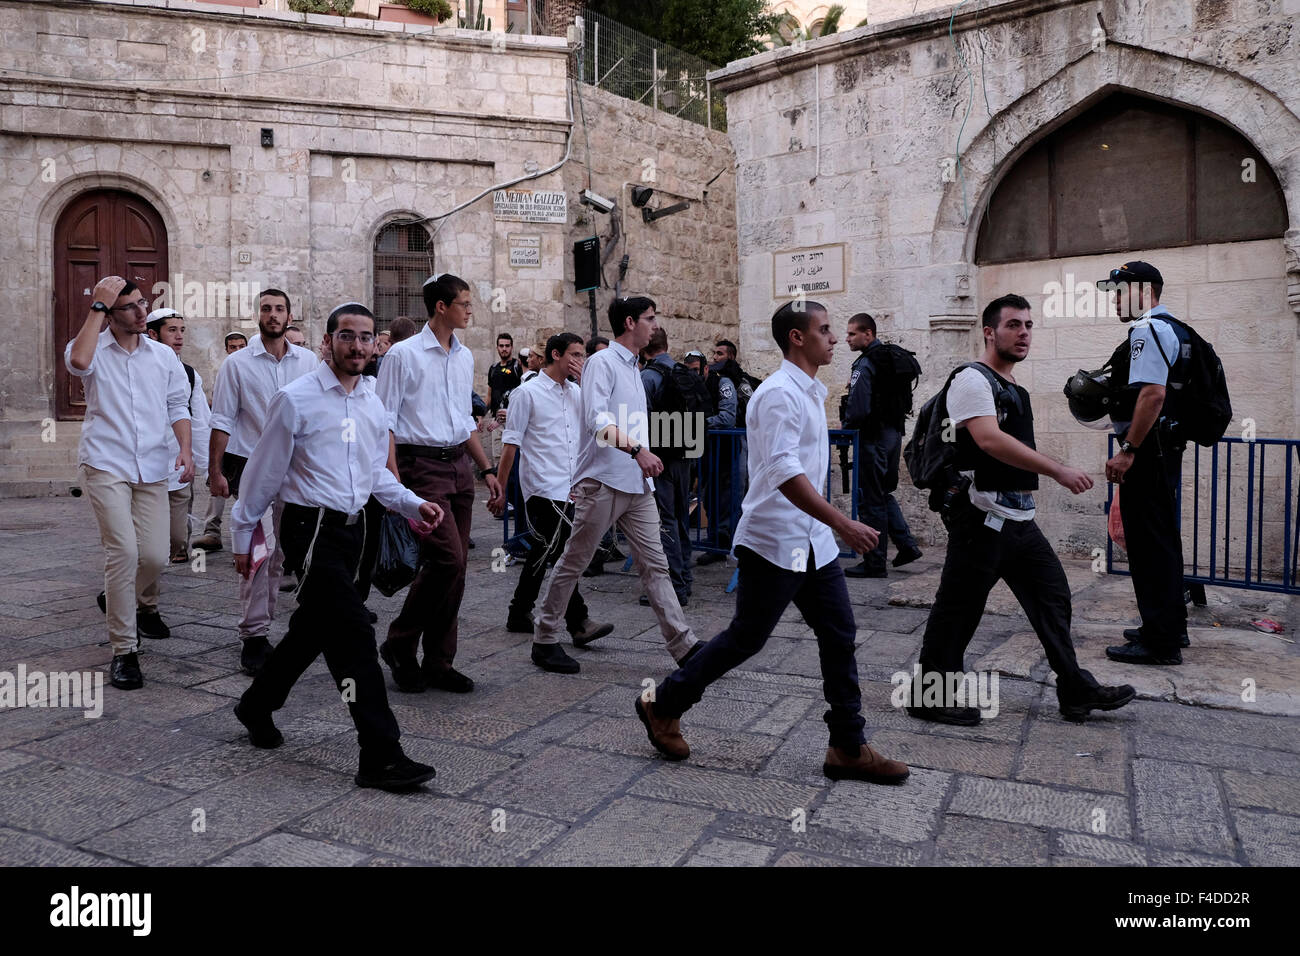 A group of Yeshiva religious Jews walk past Members of the Israeli Security Forces standing guard in Al Wad street which Israelis call Haggai in the Muslim Quarter, old city of Jerusalem Israel Stock Photo